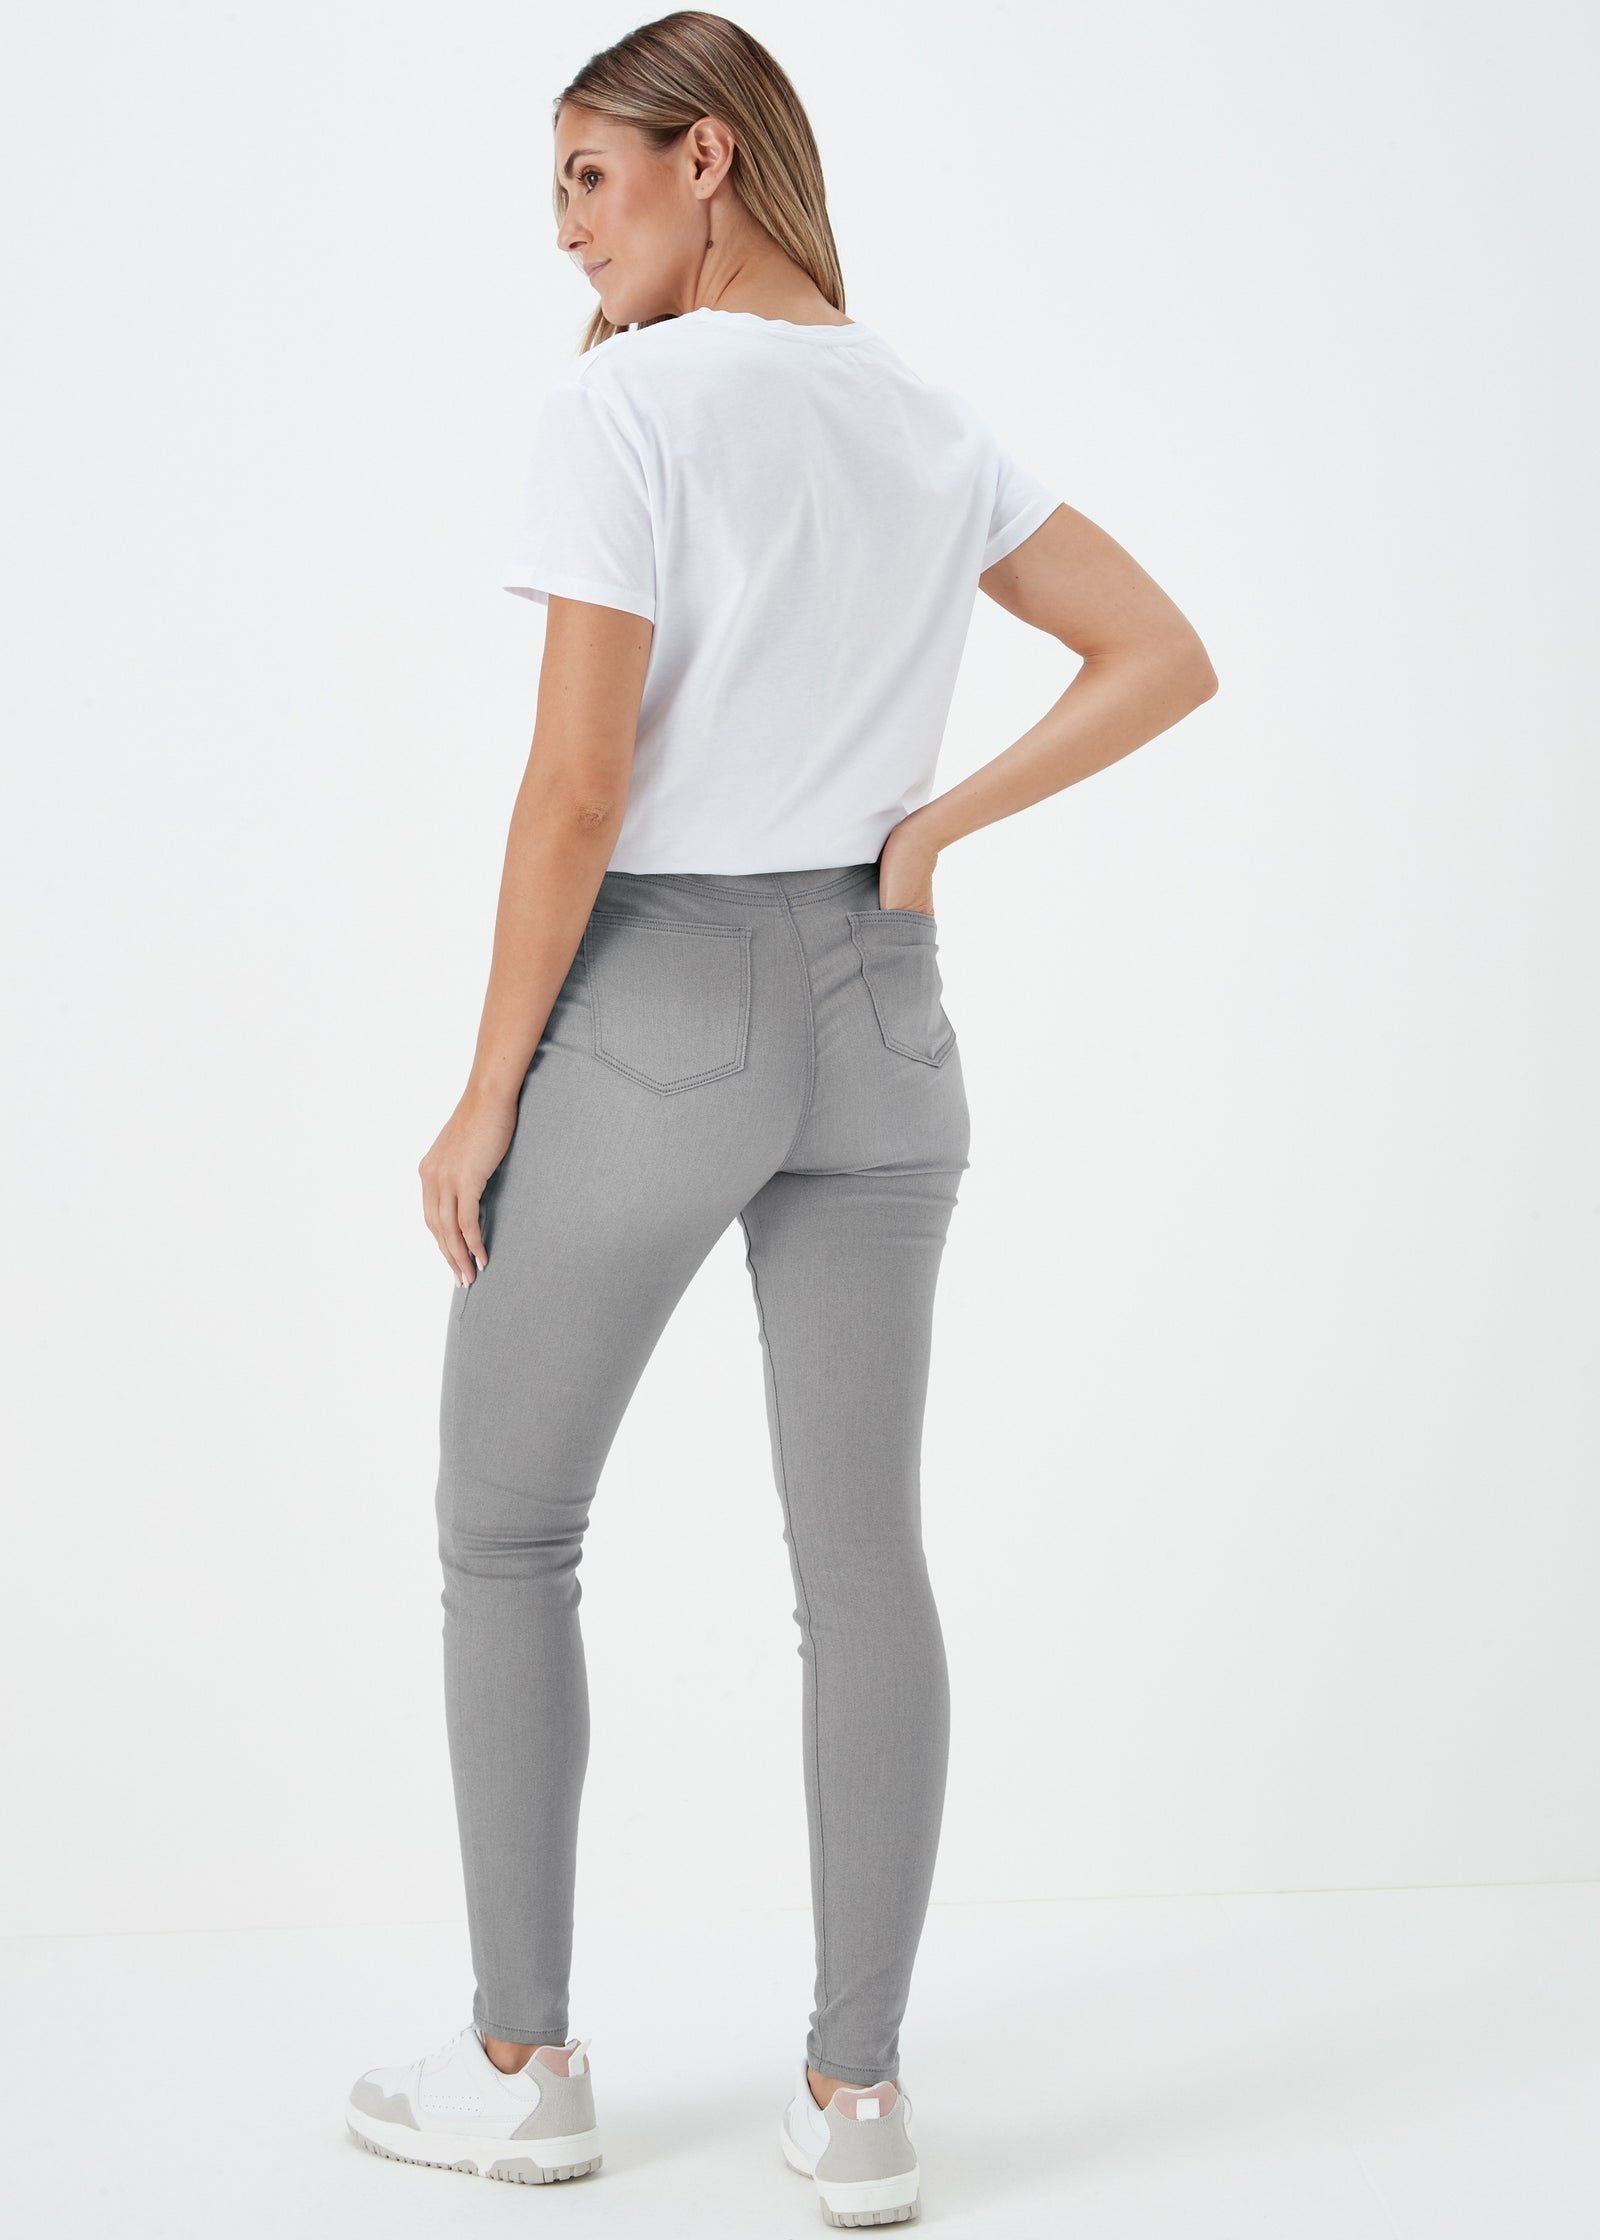 Want the appearance of jeans with the comfort of leggings? Look no further  than the Rosie jeggings collection. www.matalan-me.co…